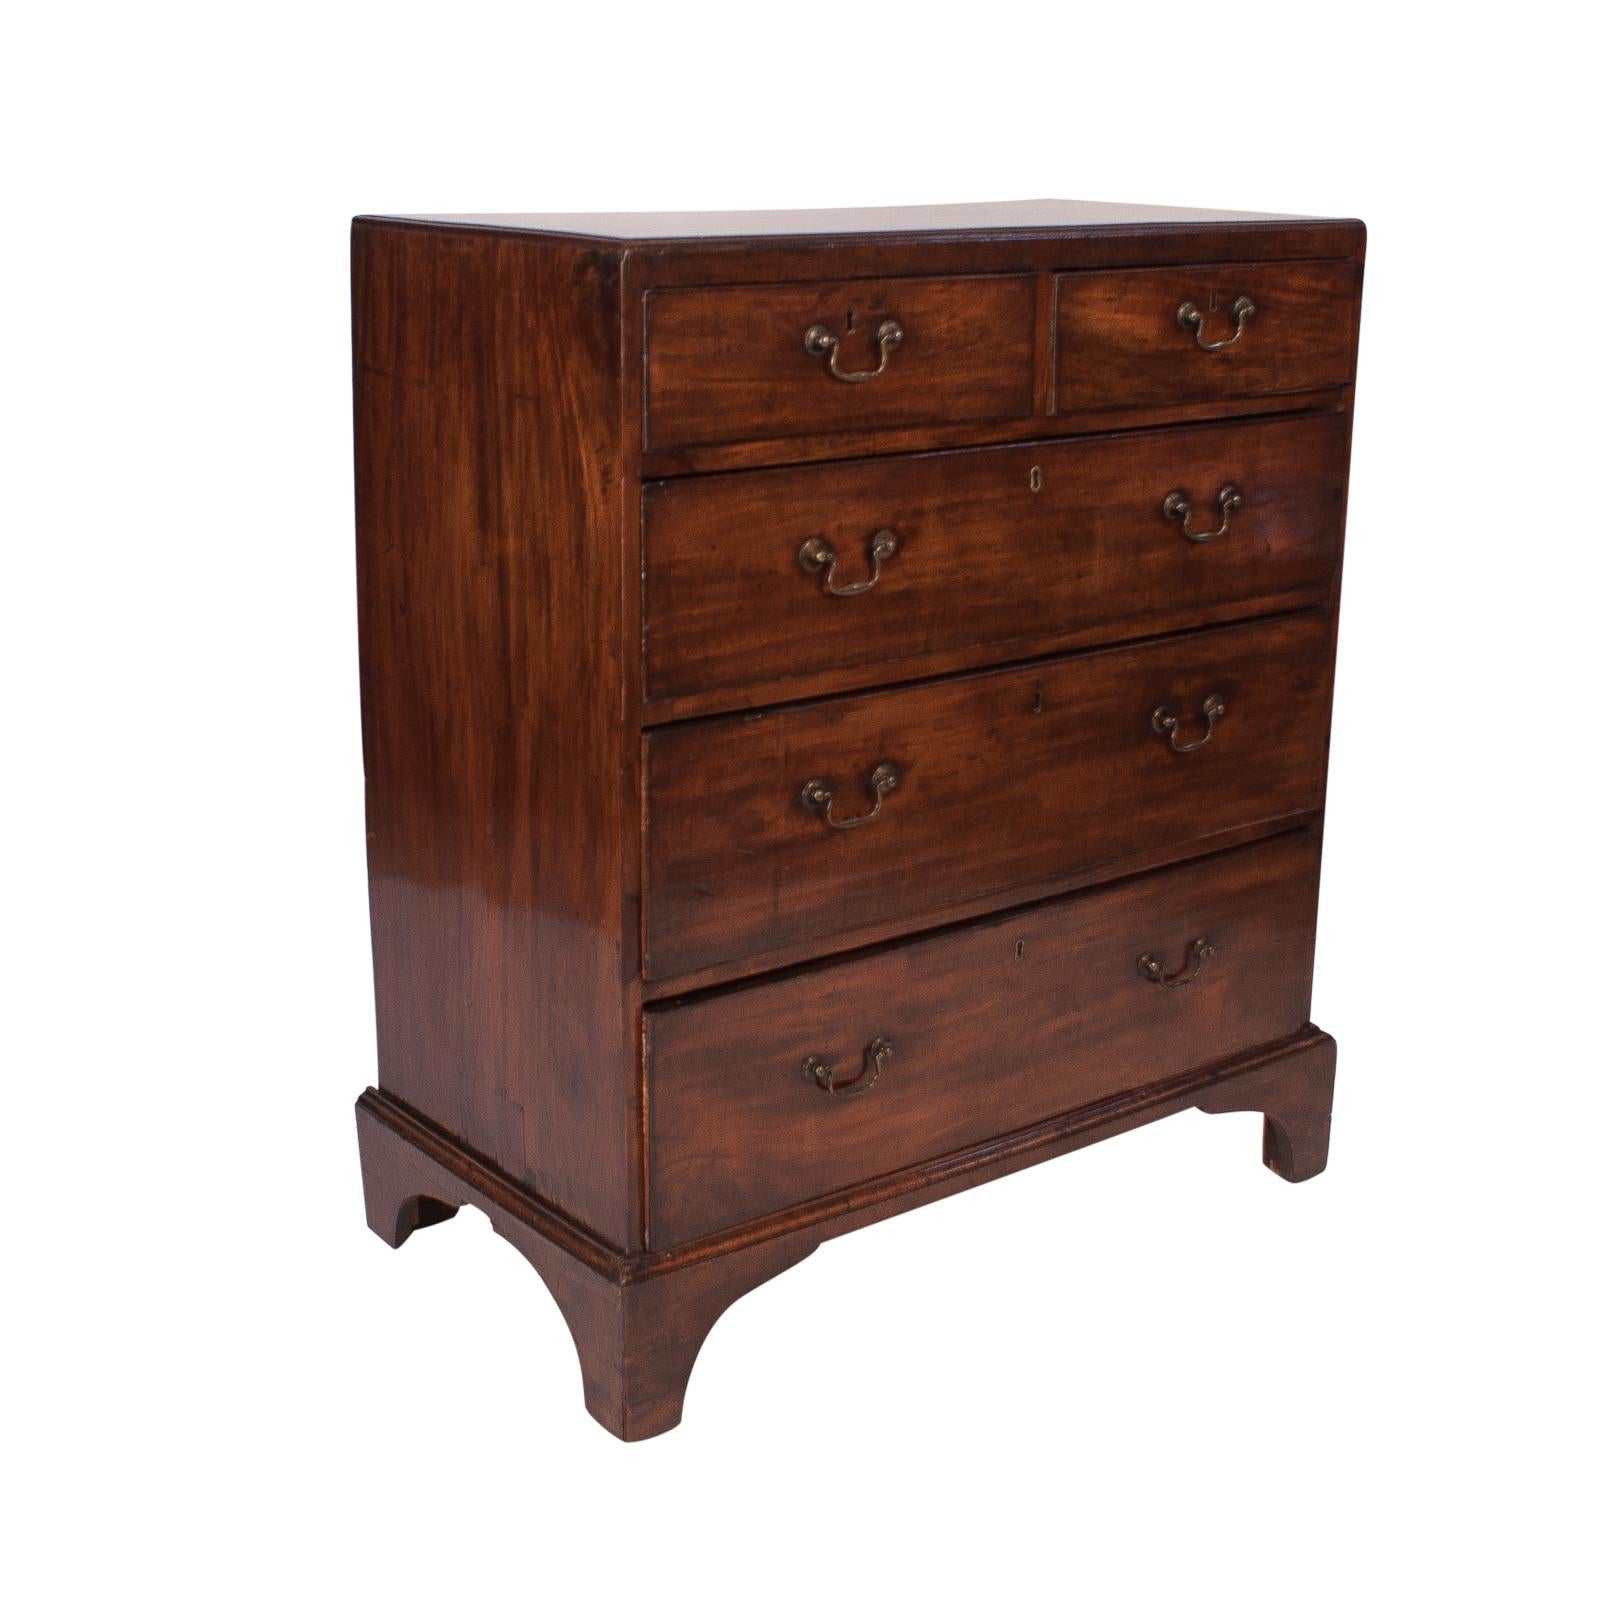 A late 18th century George III period mahogany chest of drawers, circa 1780. Good size, scale and color. In good condition recently tightened and polished with drawers working well. A classic piece of handmade furniture.